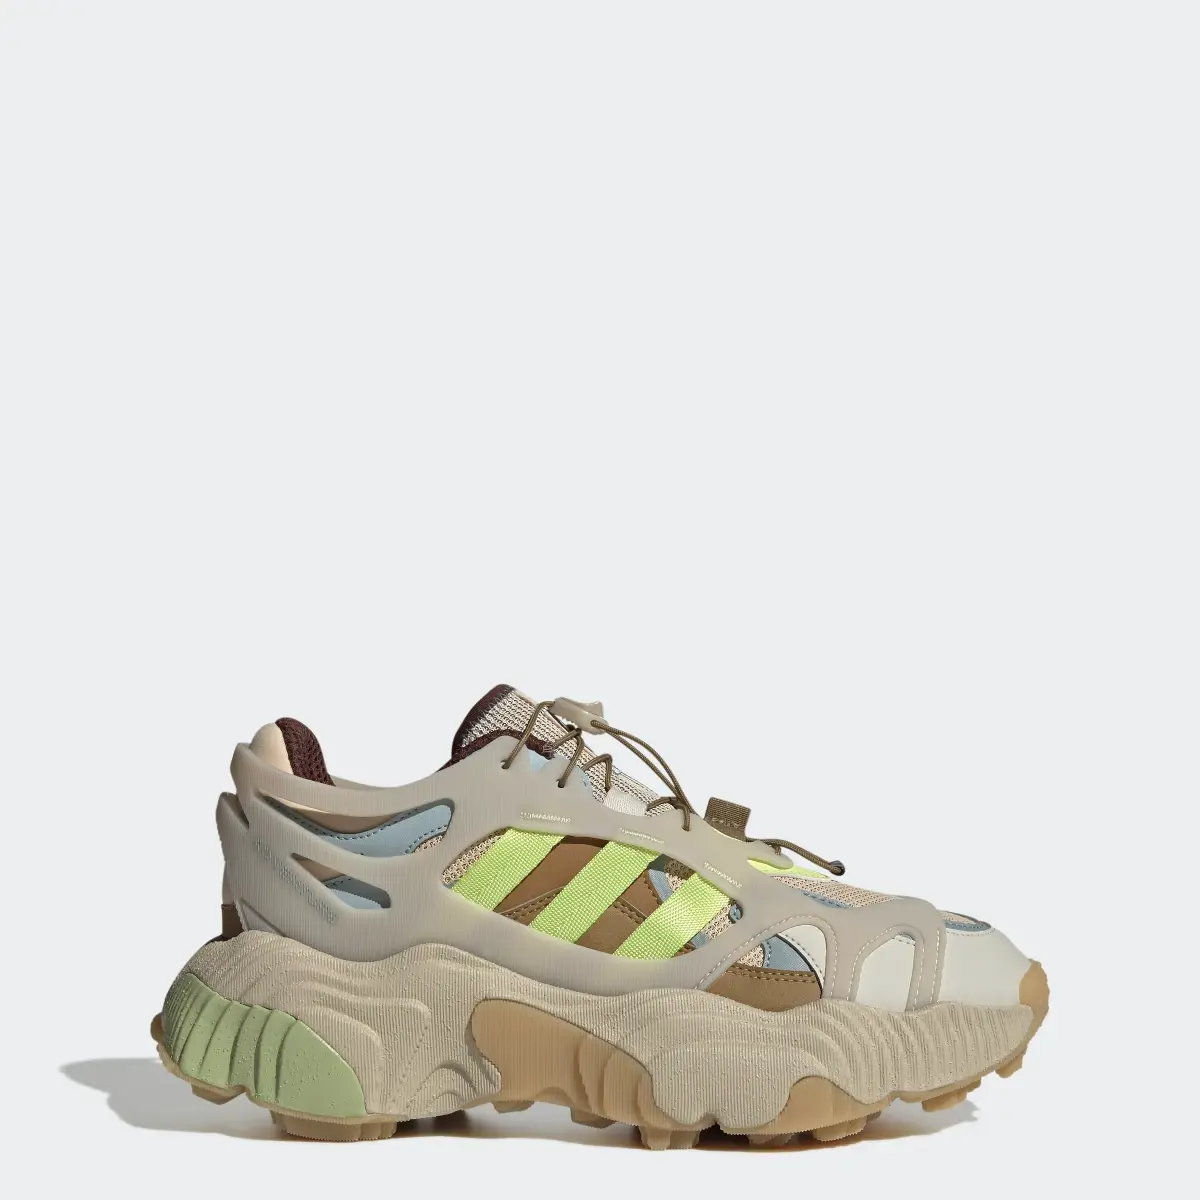 Adidas Roverend Adventure Shoes. 1